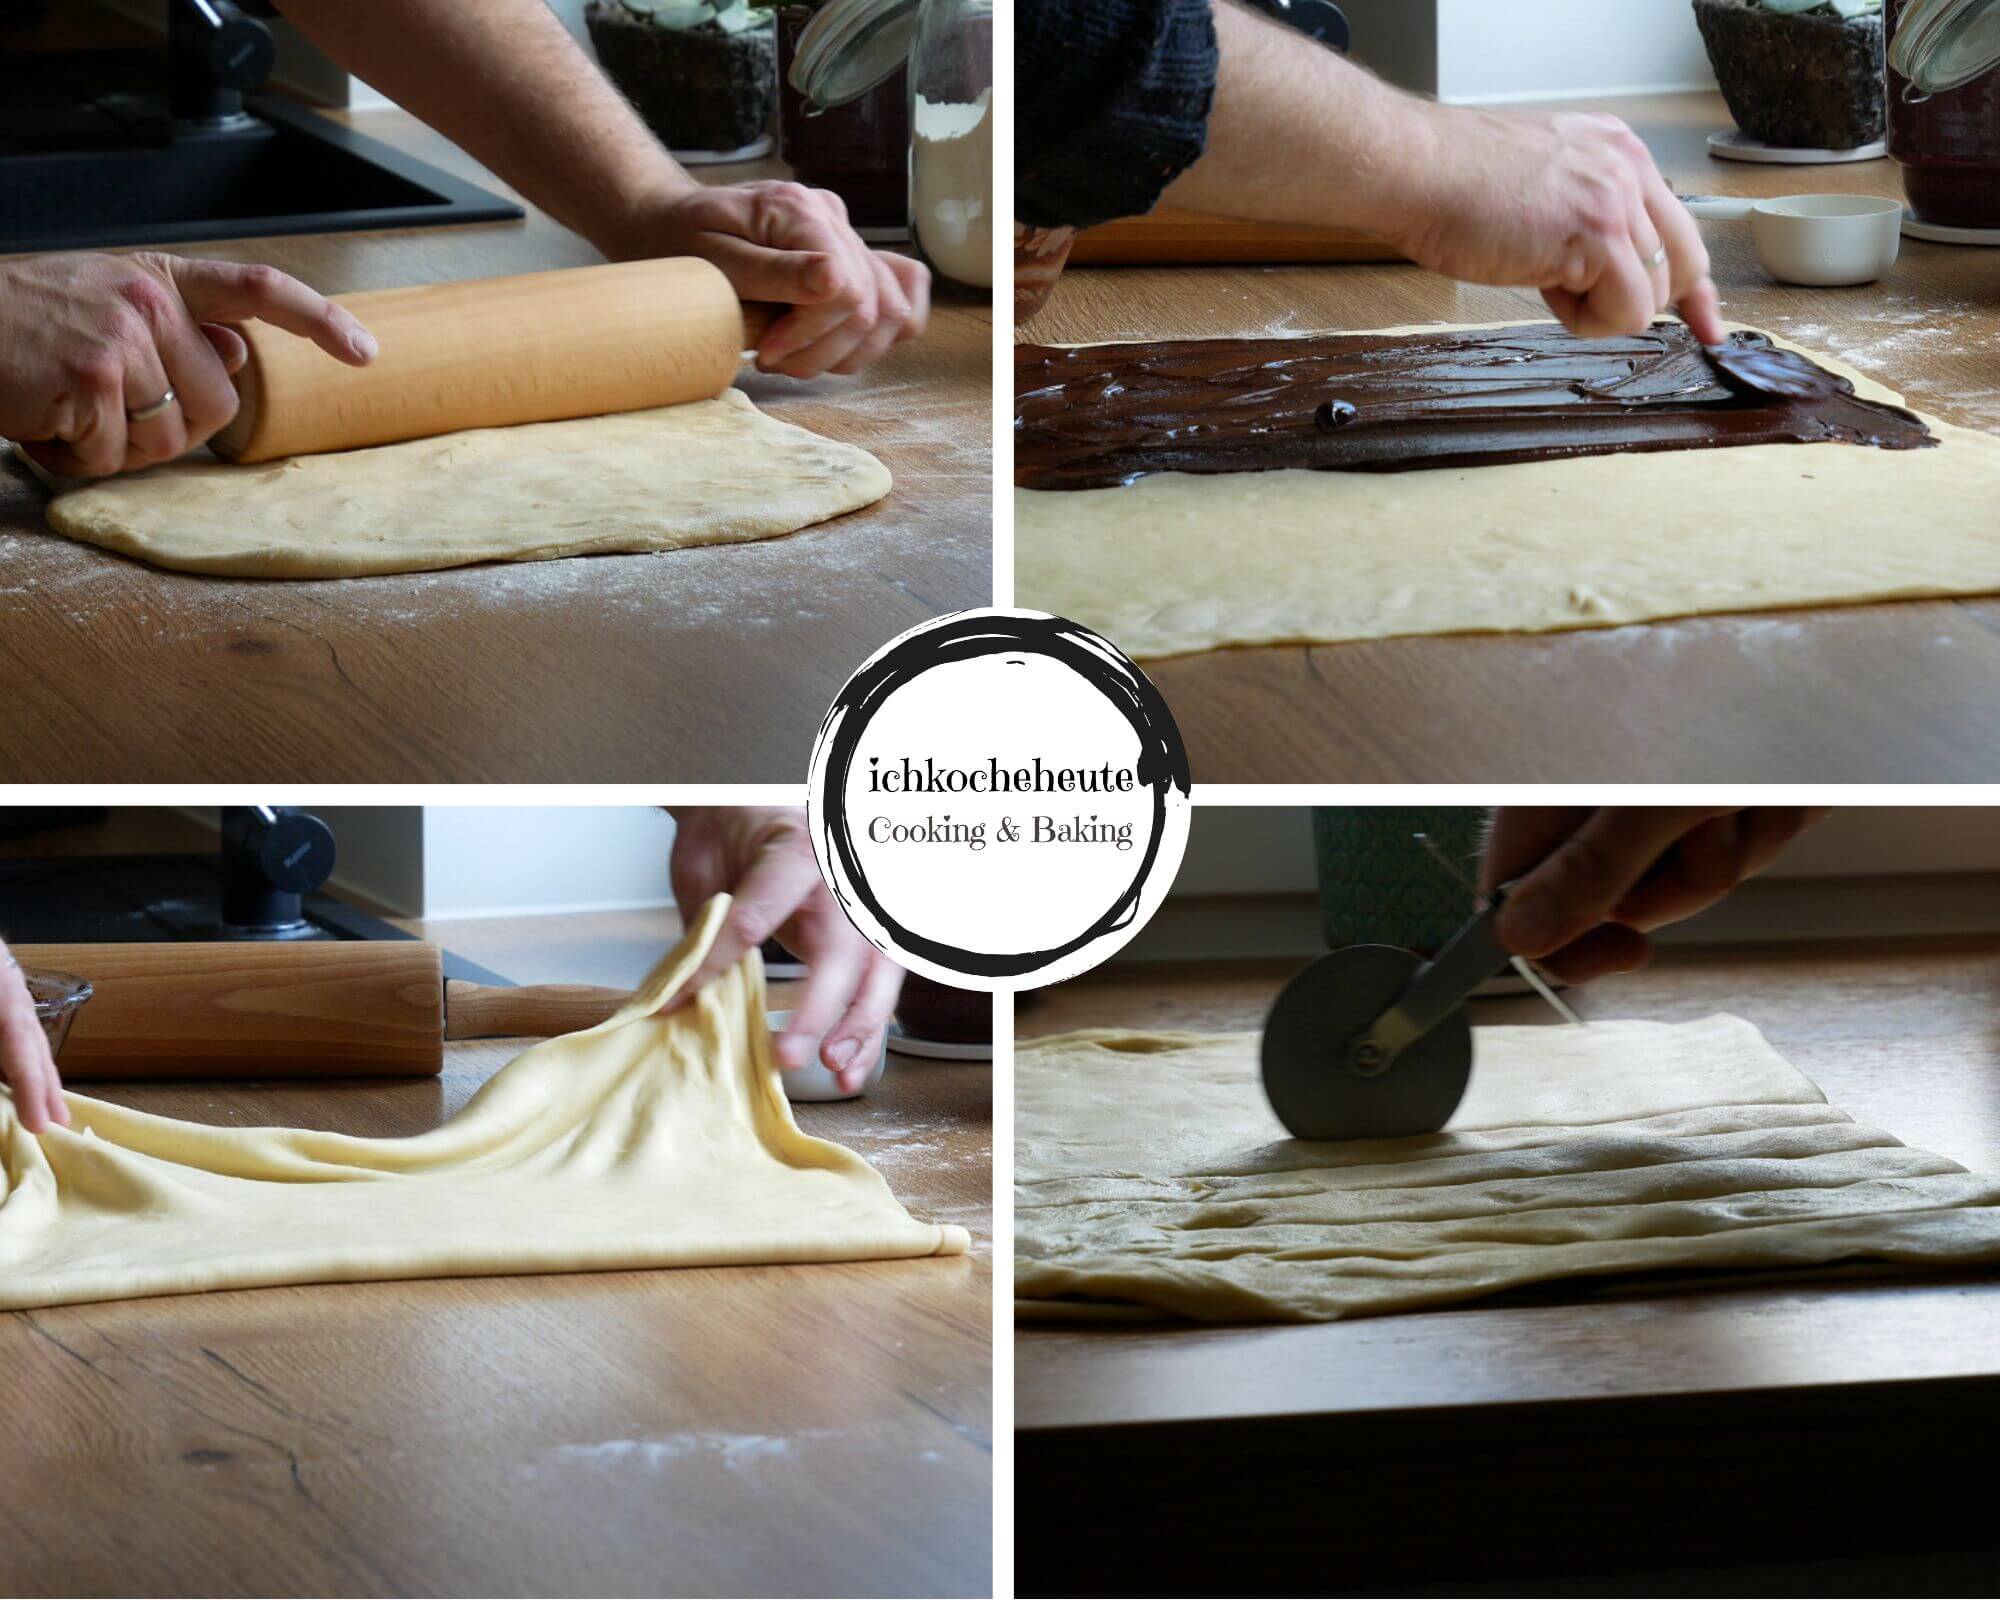 Filling Yeast Dough with Chocolate Ganache